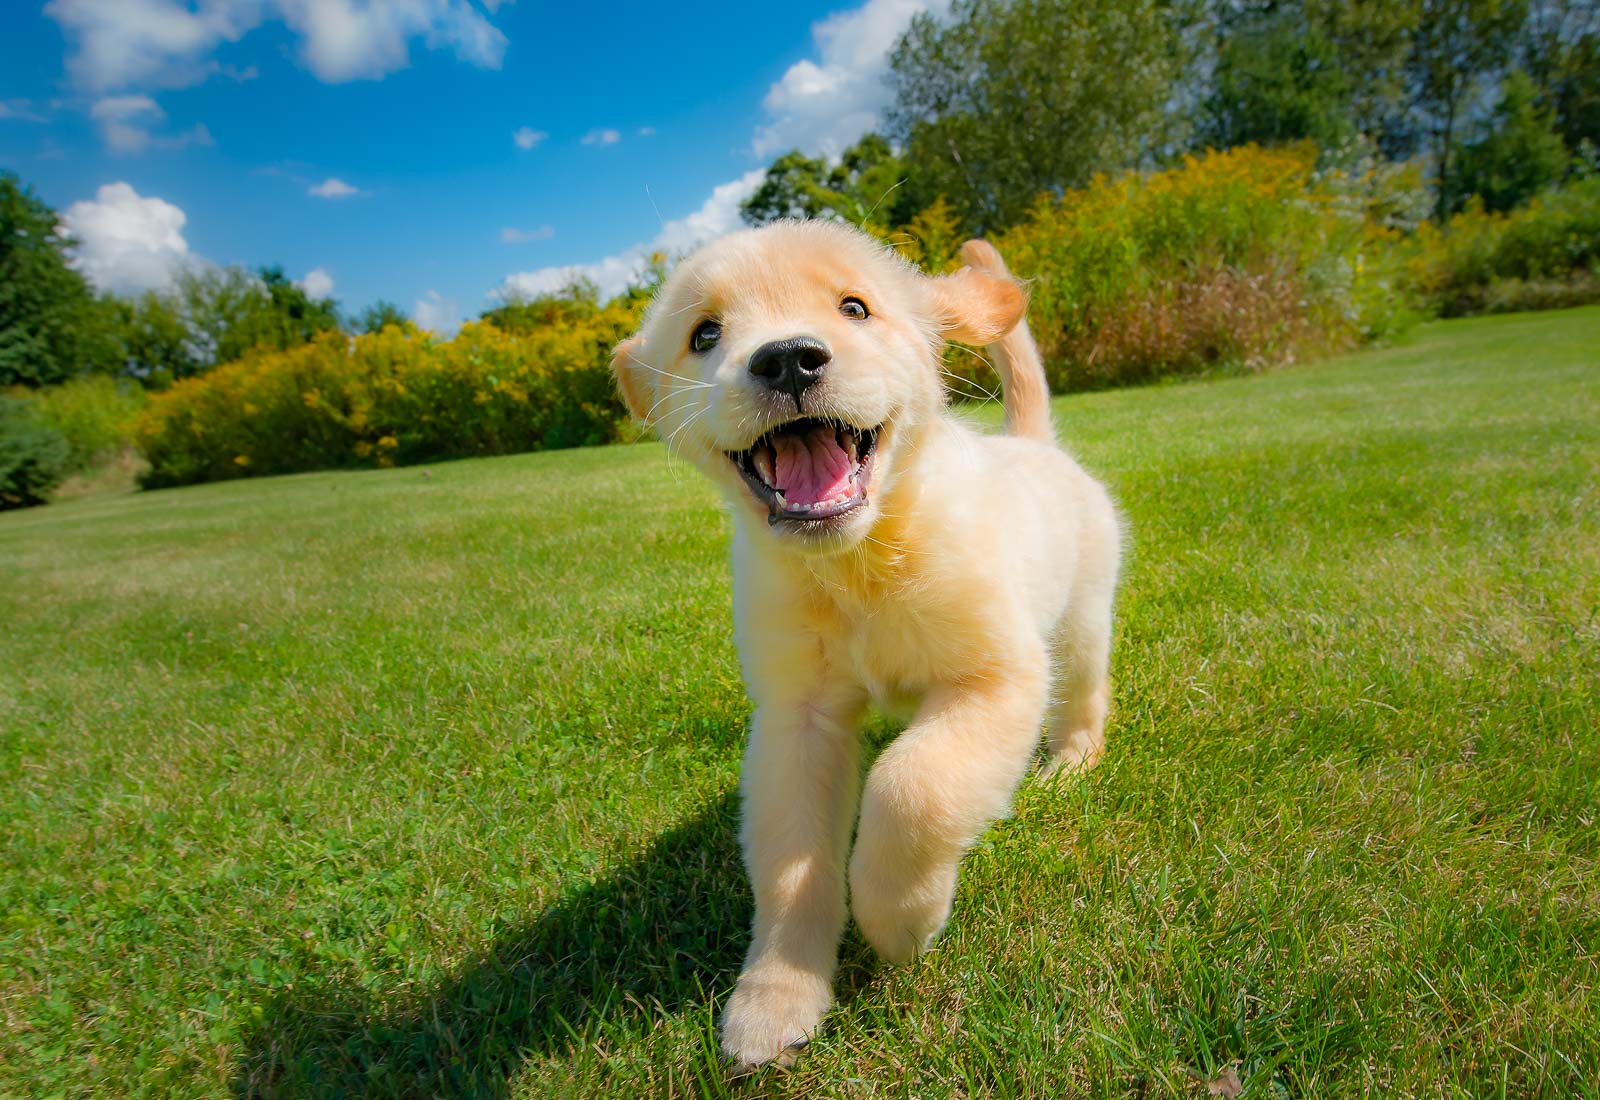 Golden Retriever puppy smiling and running